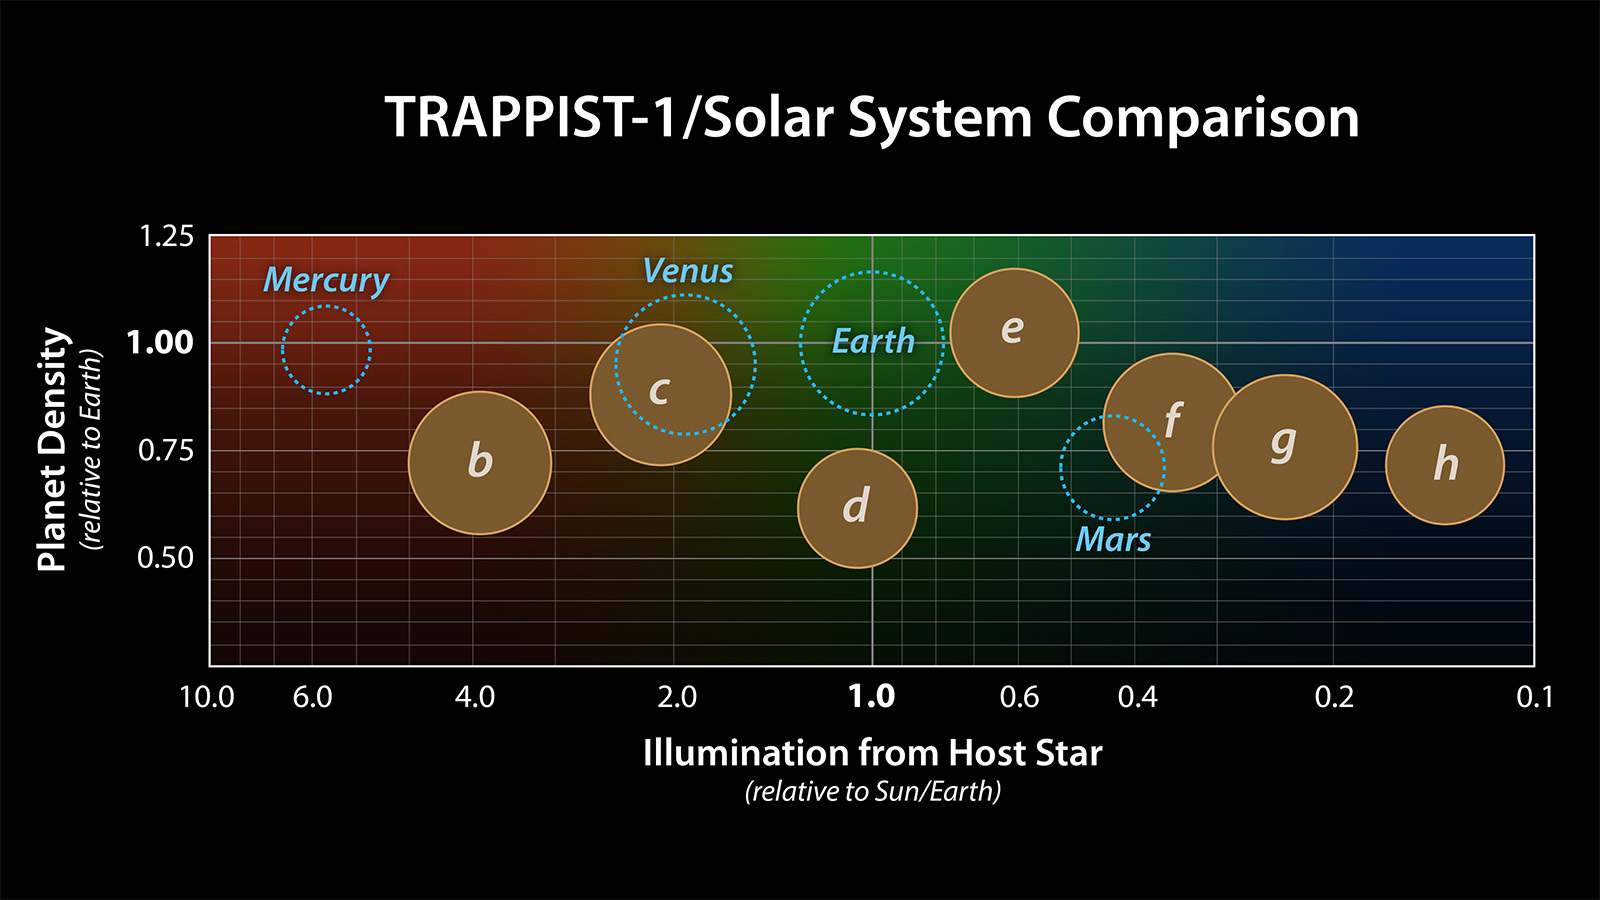 Comparing TRAPPIST-1 to the Solar System